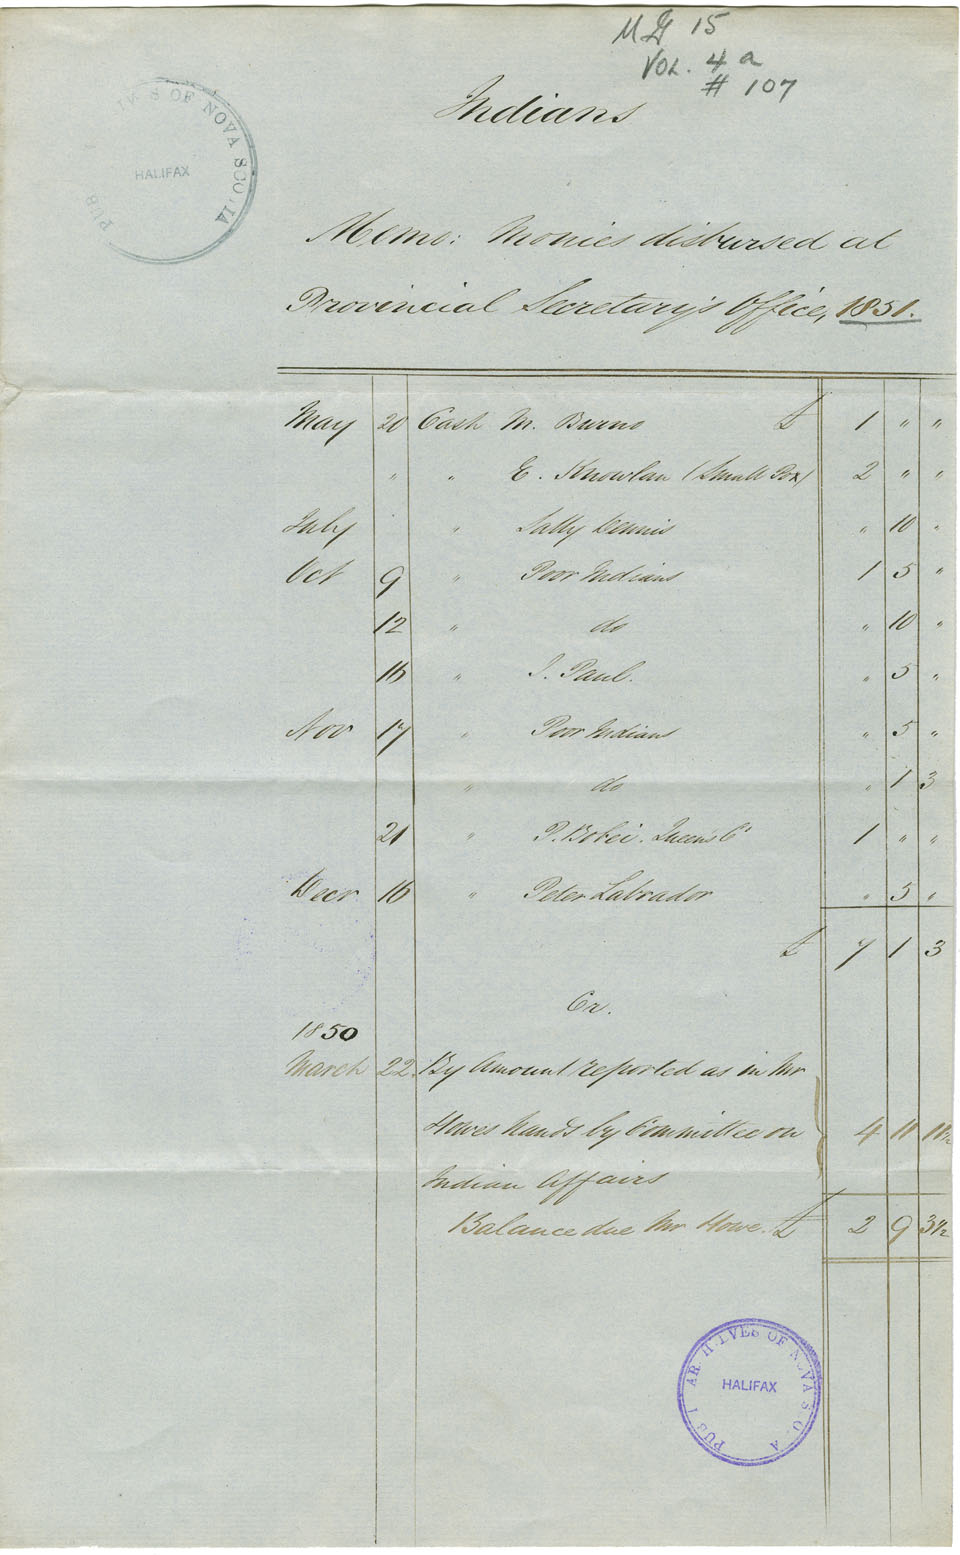 Disbursement of money by Commission of Indian Affairs for 1851.